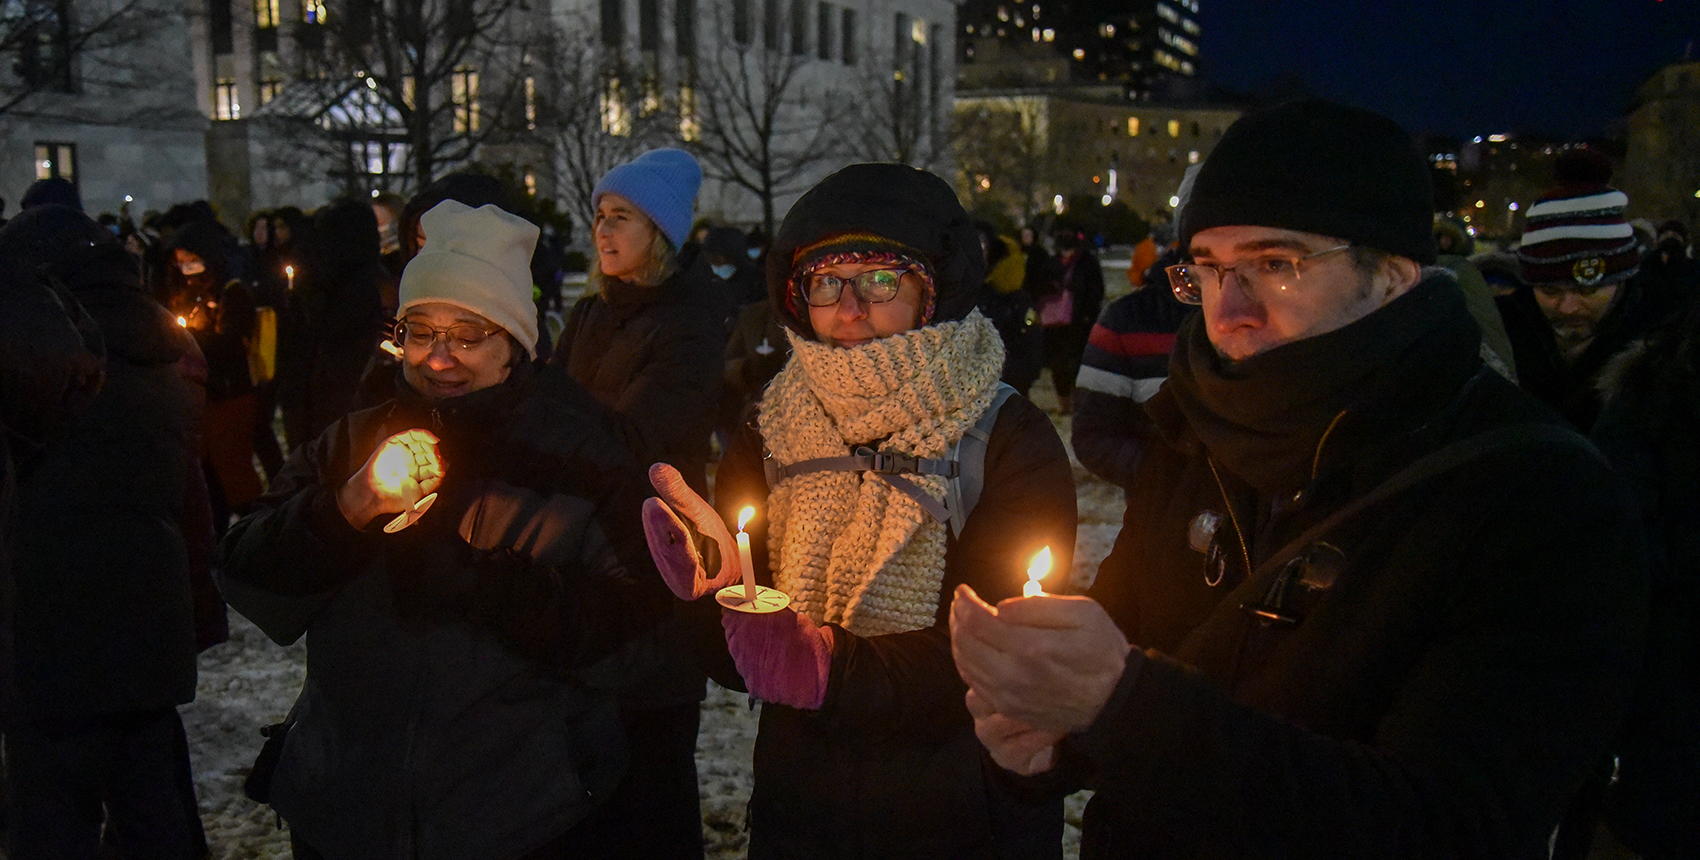 People outdoors on a snowy night wearing warm clothes and holding glowing candles